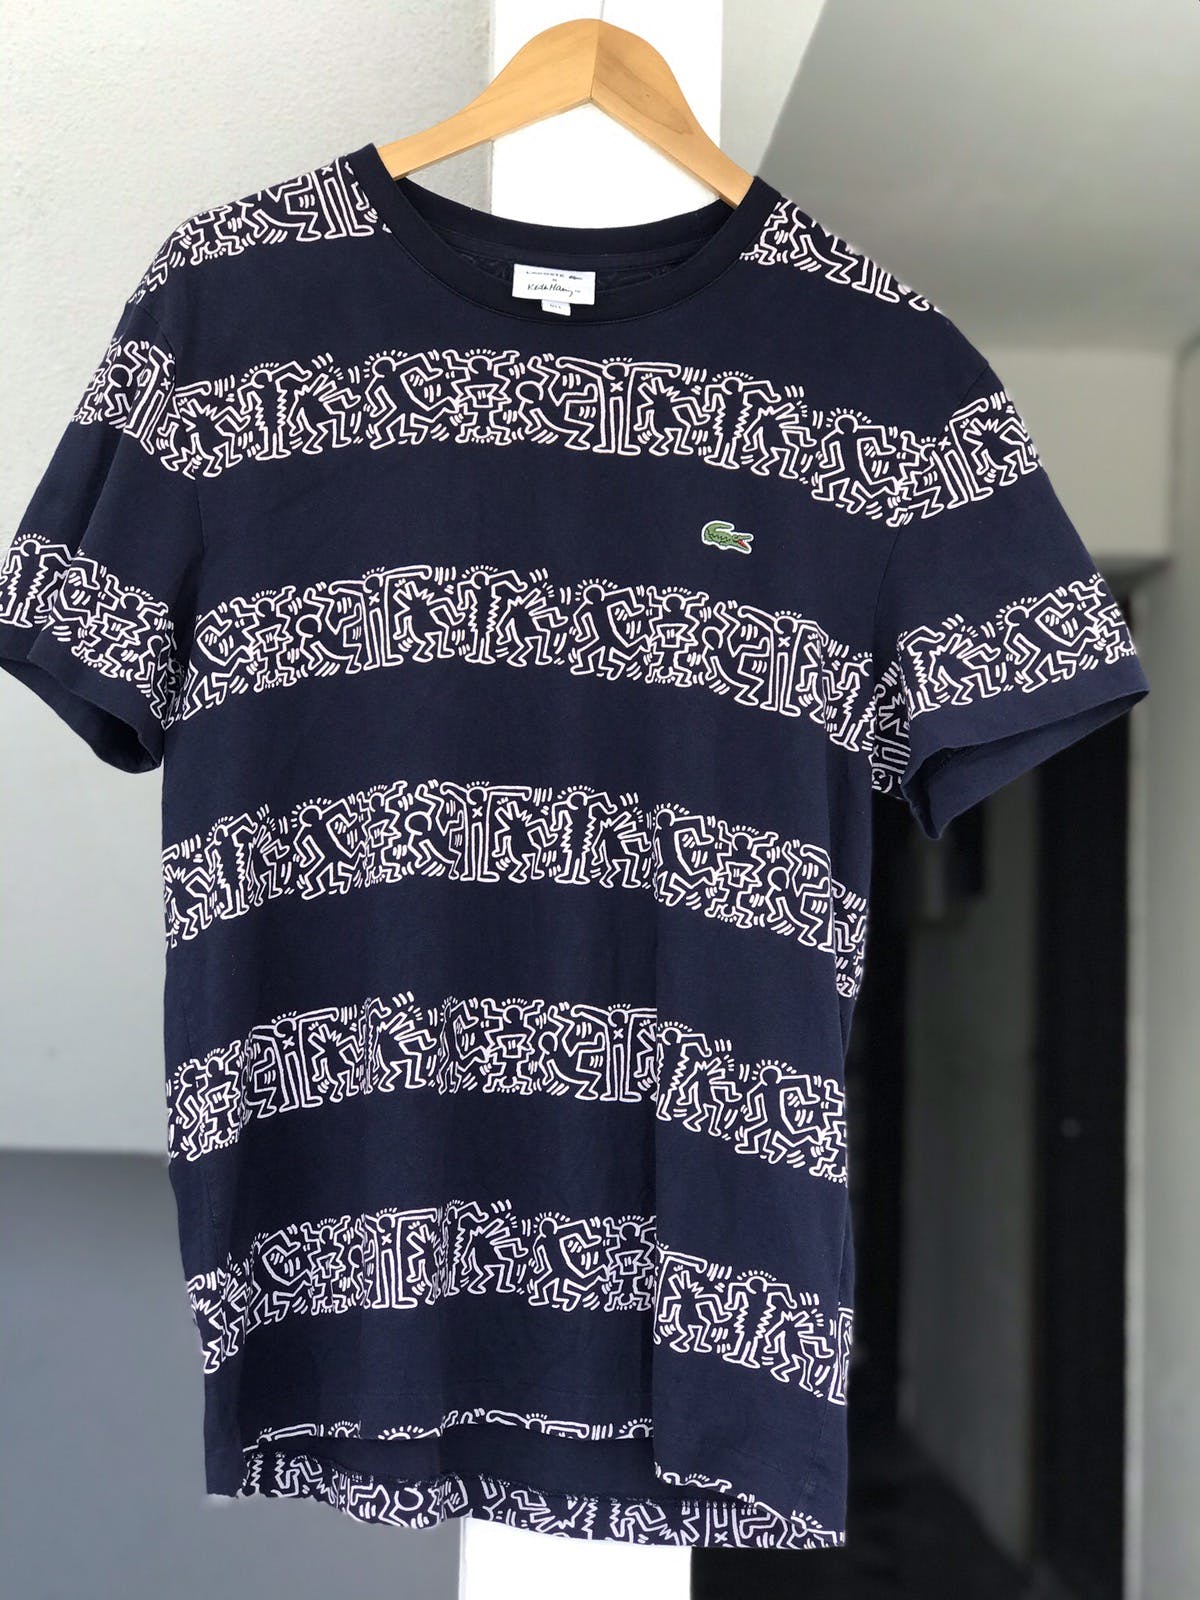 Lacoste collaboration with keith haring Tee - 2